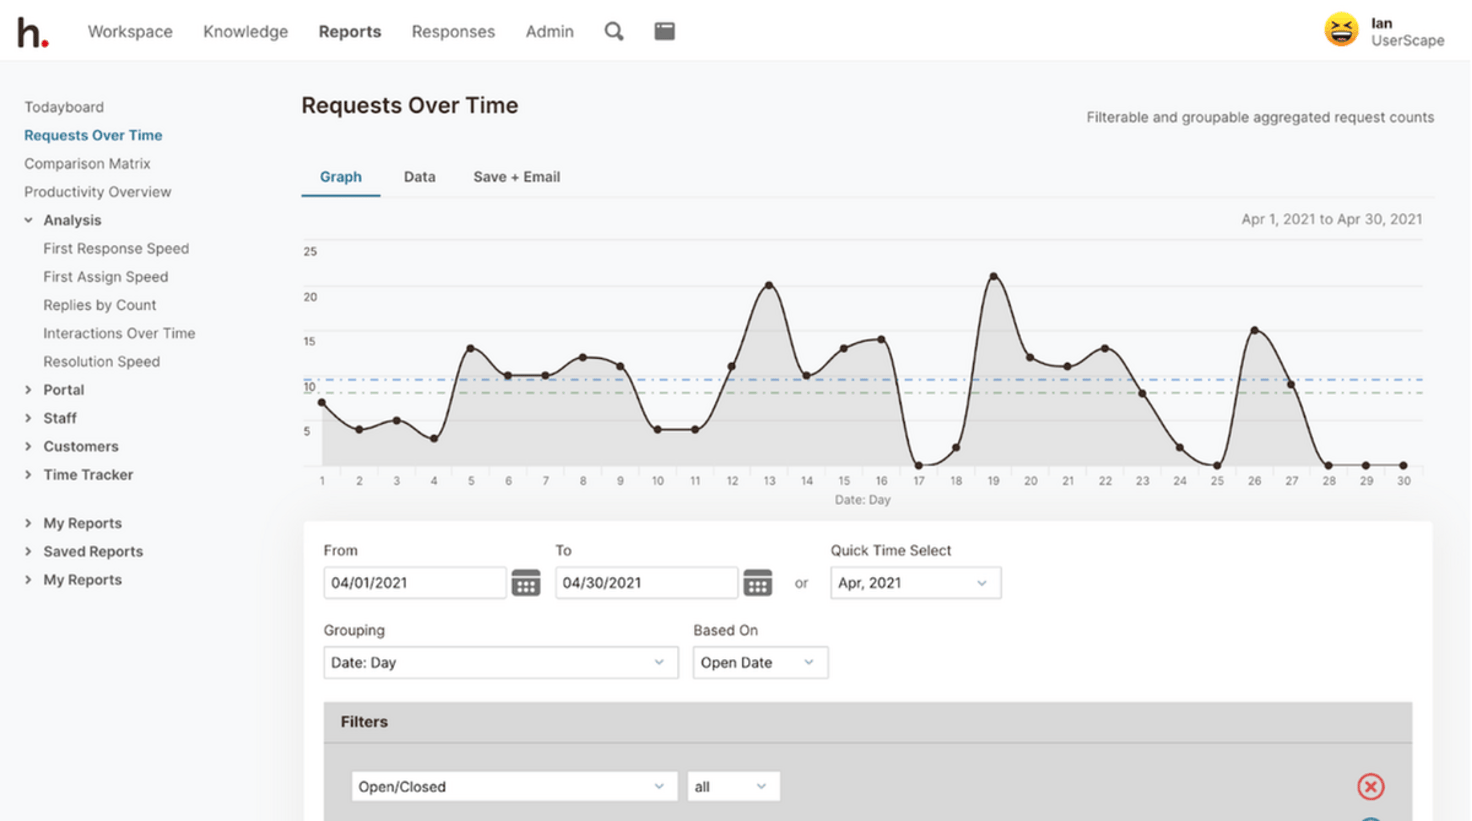 HelpSpot analytics: Requests Over Time